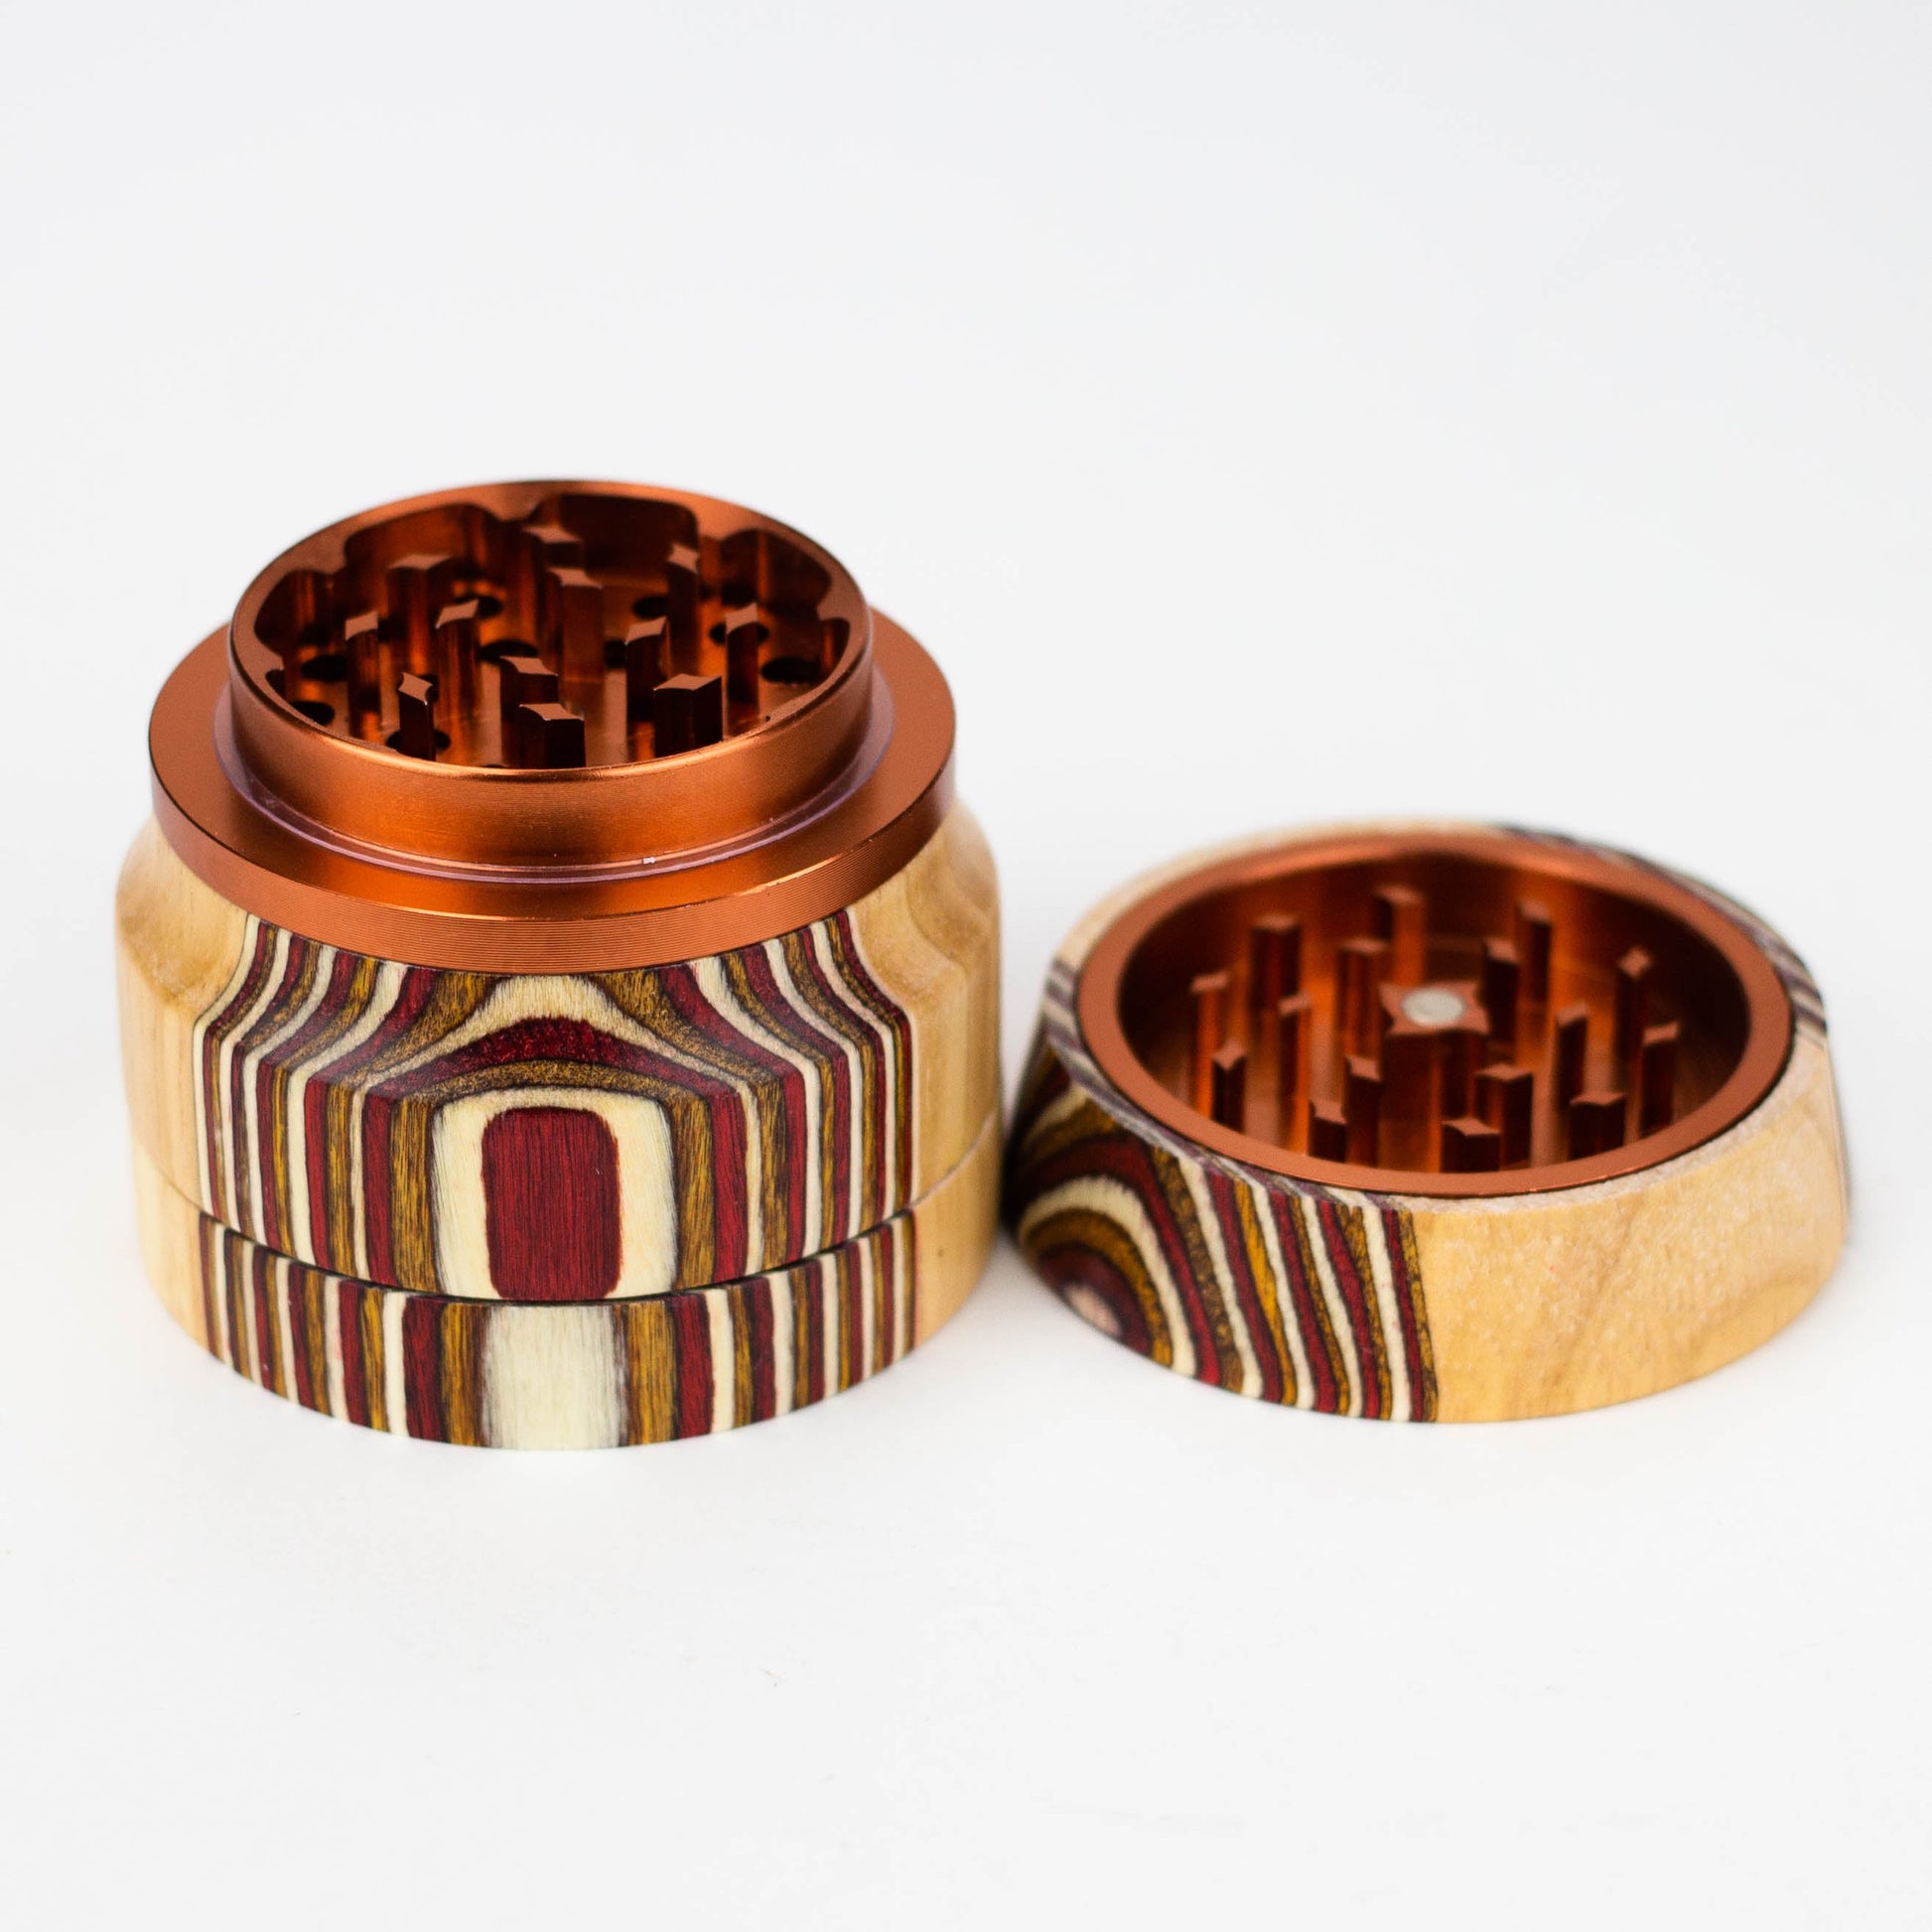 Genie 4 parts wooden cover grinder [SS147]_3